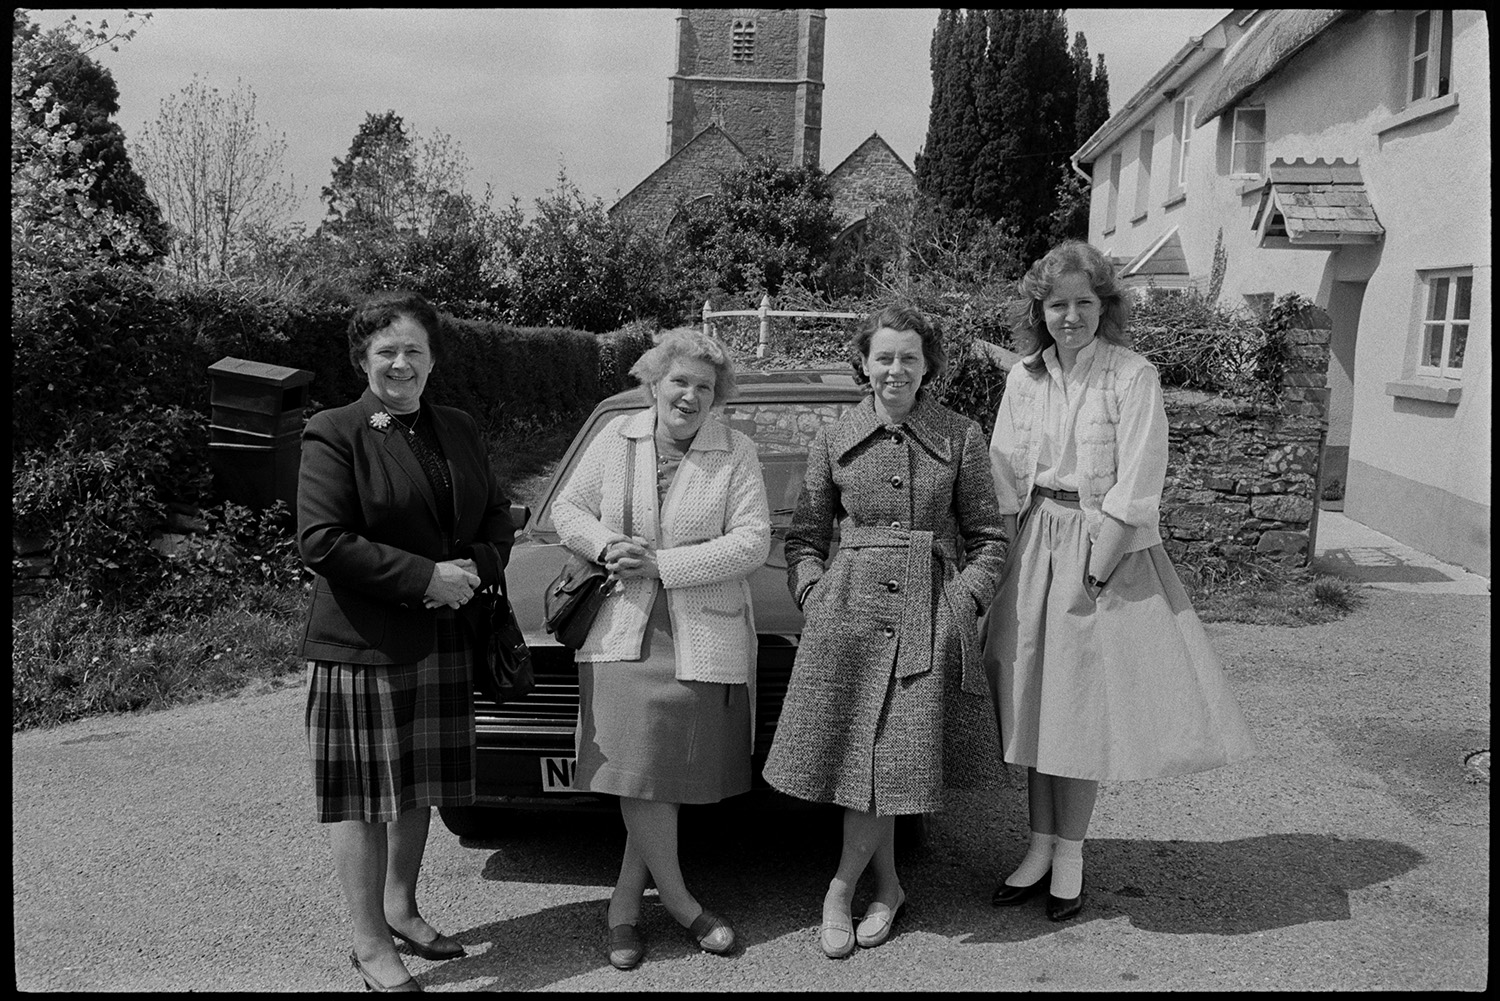 Club Day, people waiting before parade, Silver Band and club members setting off, drinkers.
[Four women standing in front of a car parked outside a house near Iddesleigh church on Iddesleigh Club Day.]